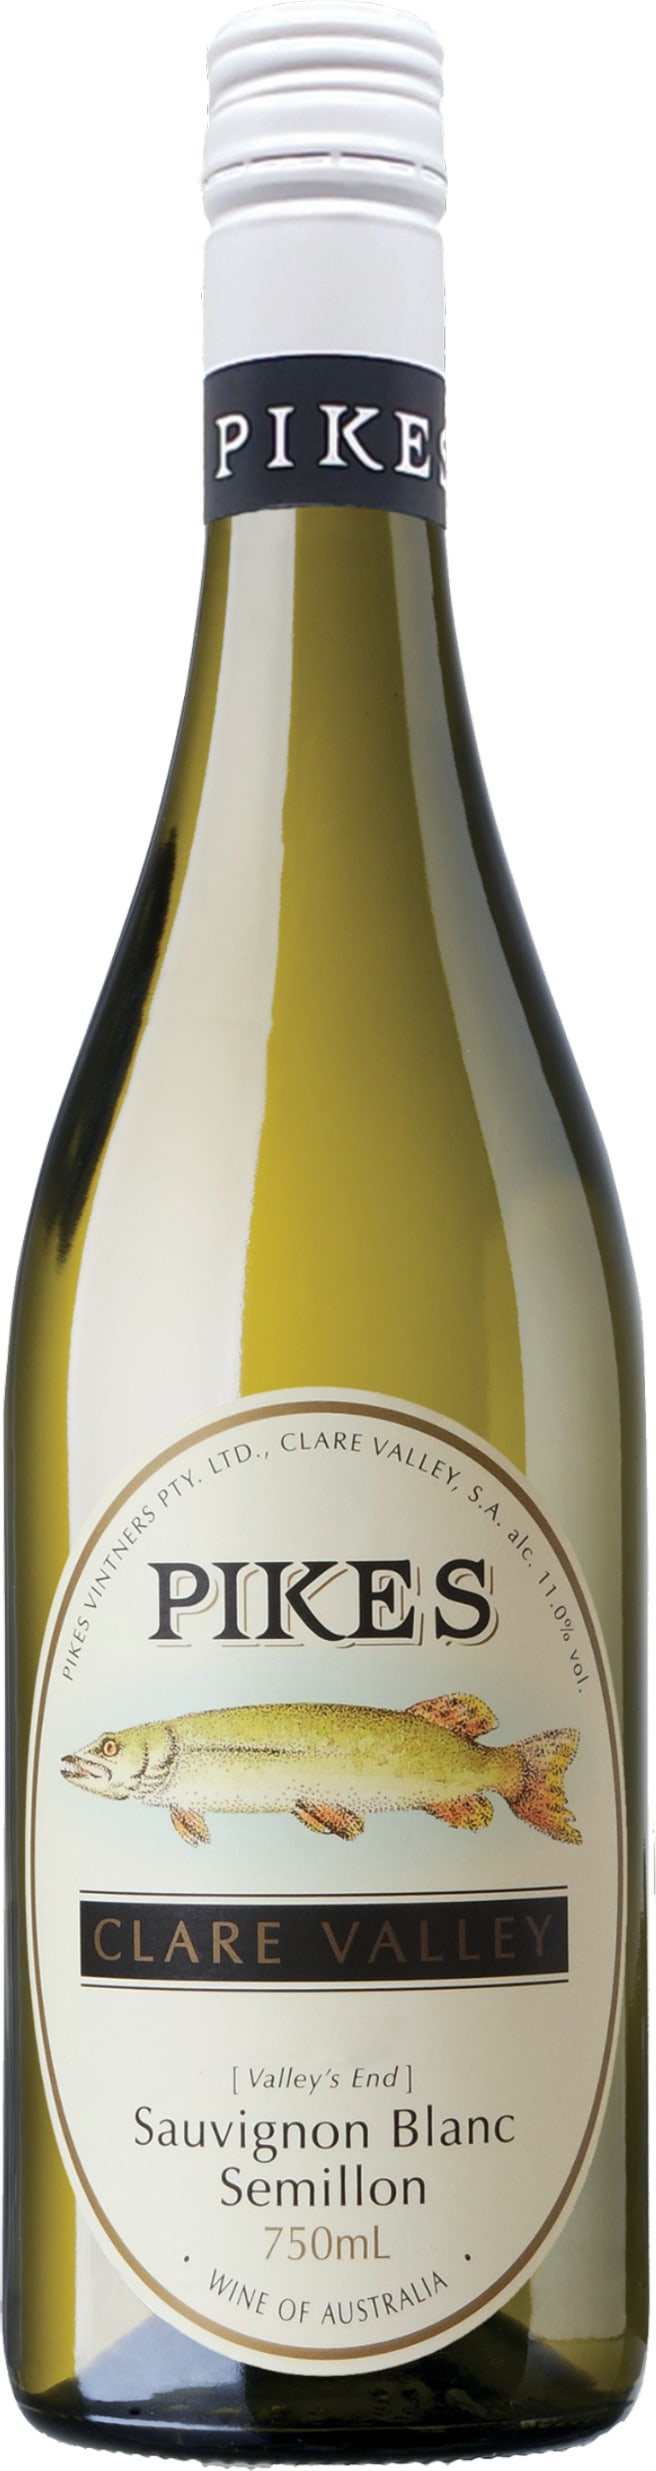 Pikes Valley's End Sauvignon Blanc Semillon 2022 75cl - Buy Pikes Wines from GREAT WINES DIRECT wine shop